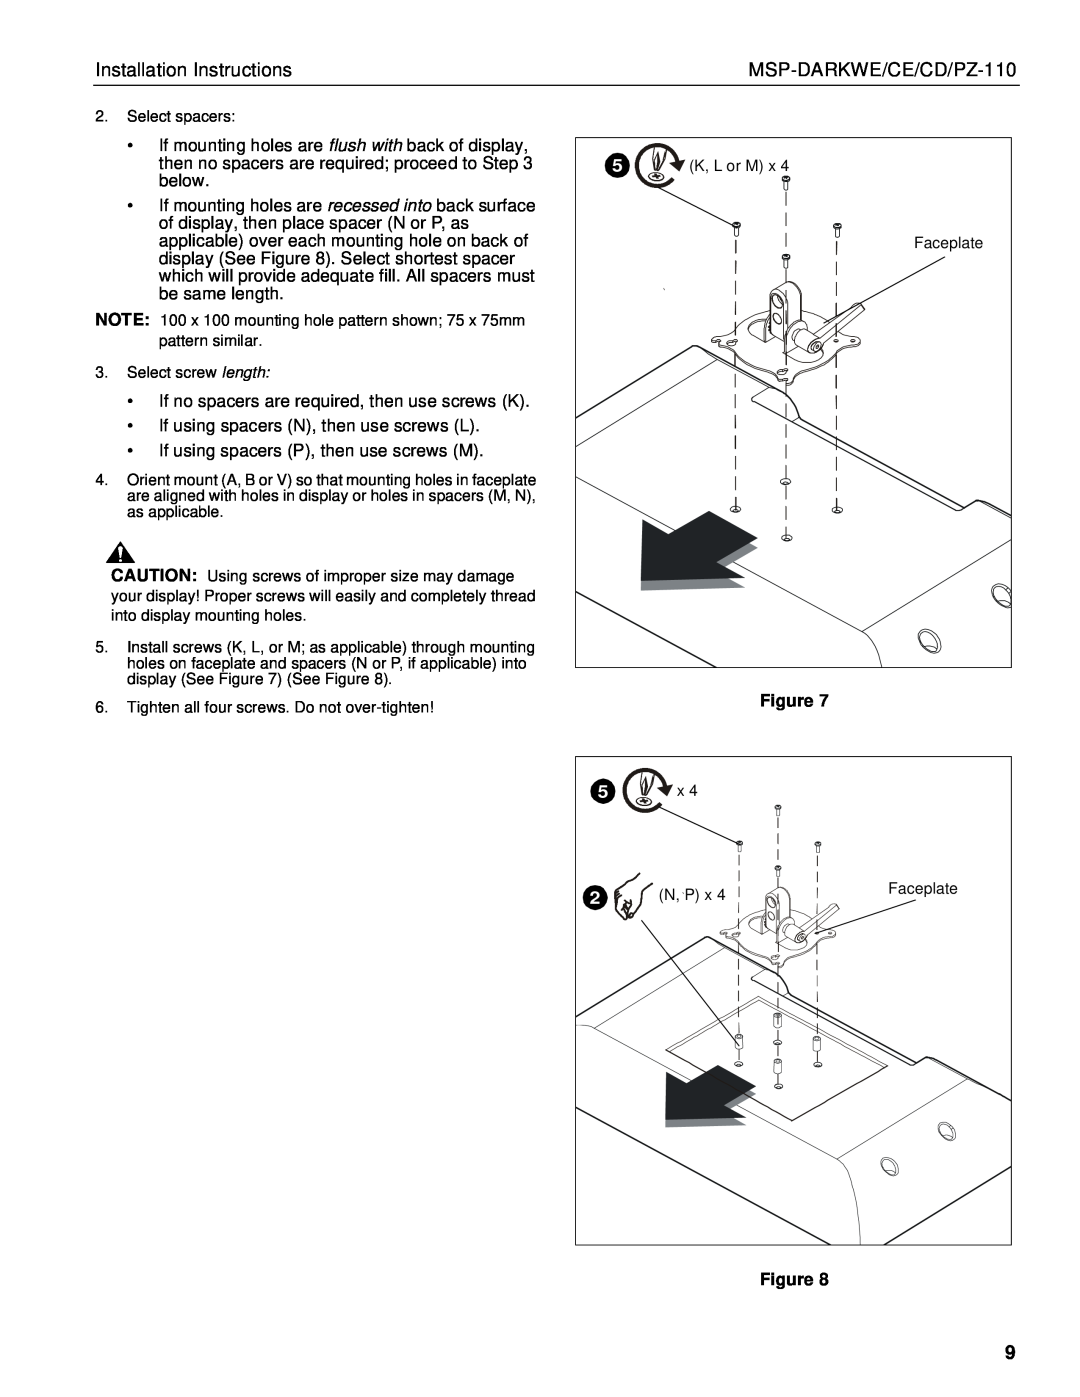 Chief Manufacturing MSP-DARKWE/CE/CD/PZ-110 Installation Instructions, If mounting holes are flush with back of display 